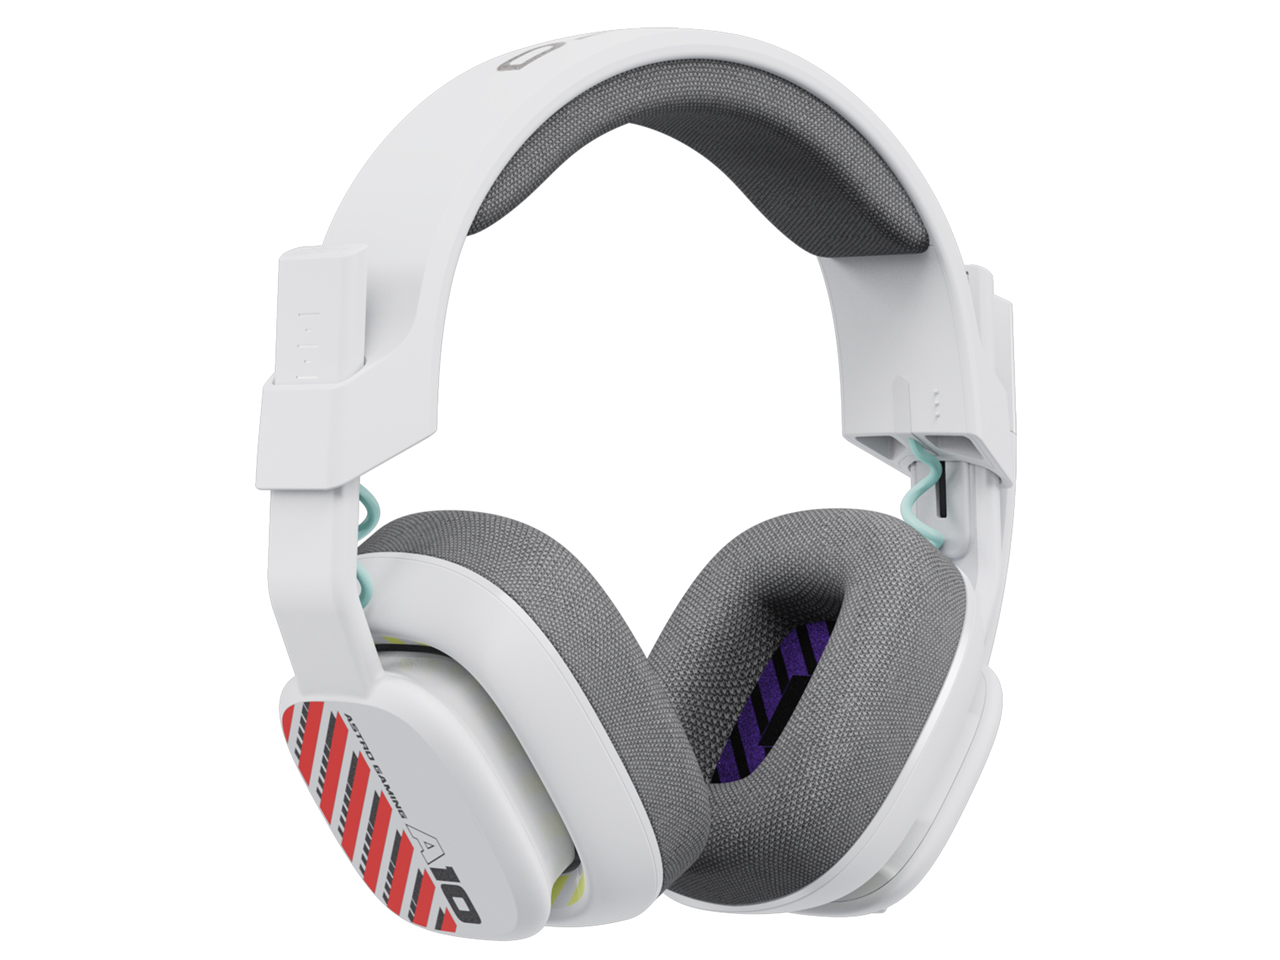 ASTRO A10 Gen 2 Gaming Headset A10G2WH [ホワイト]